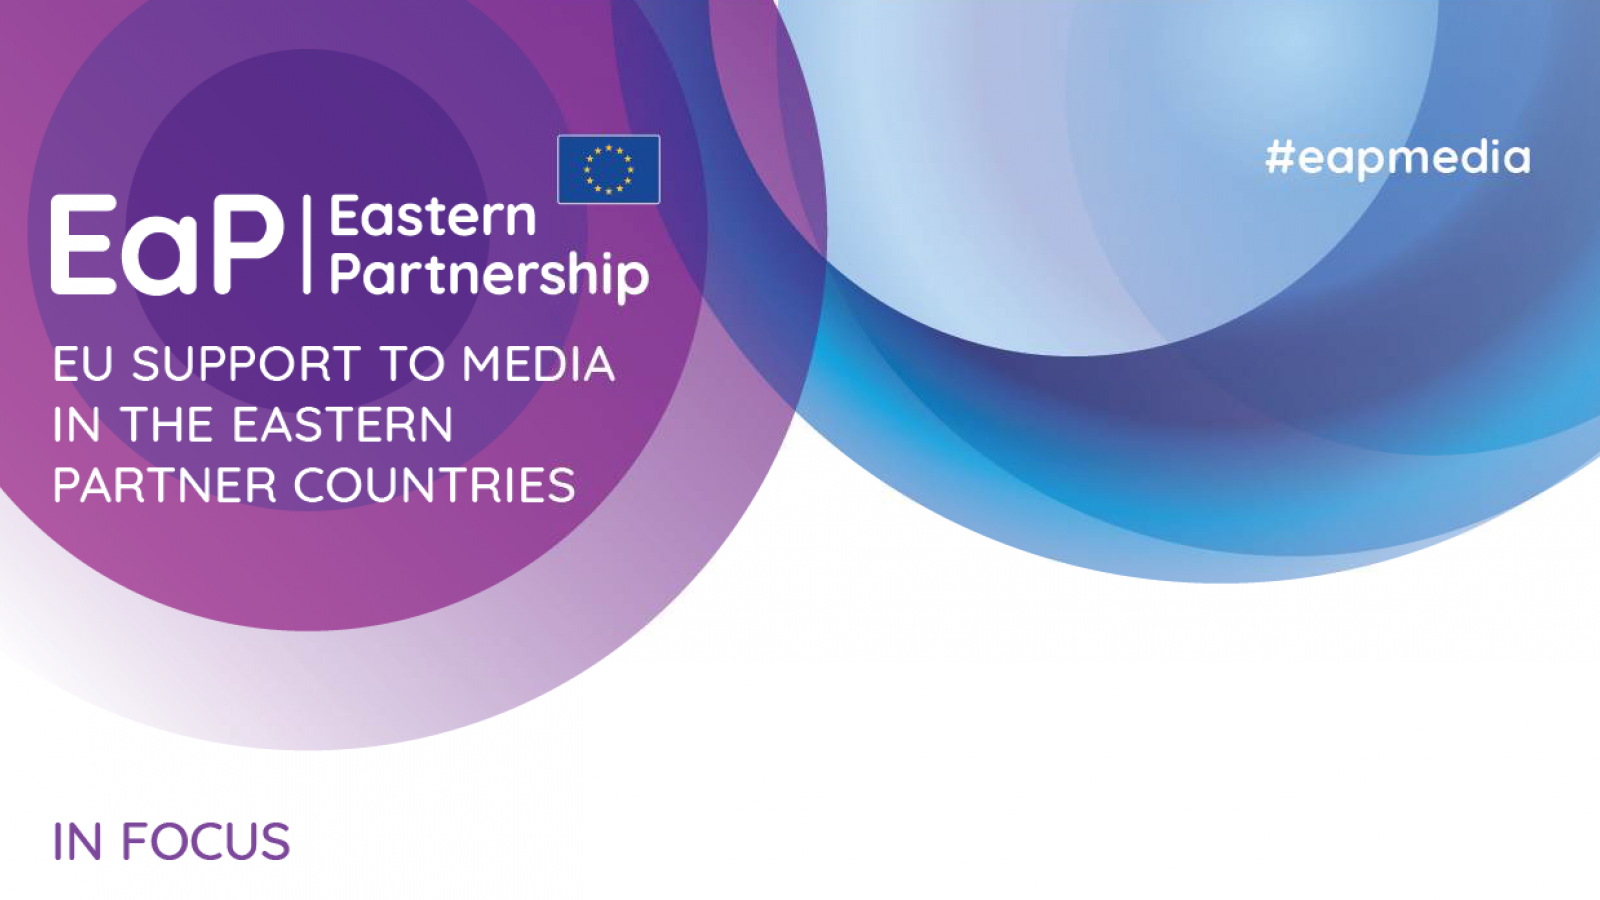 Tackling the challenges for independent media in the Eastern Partnership countries